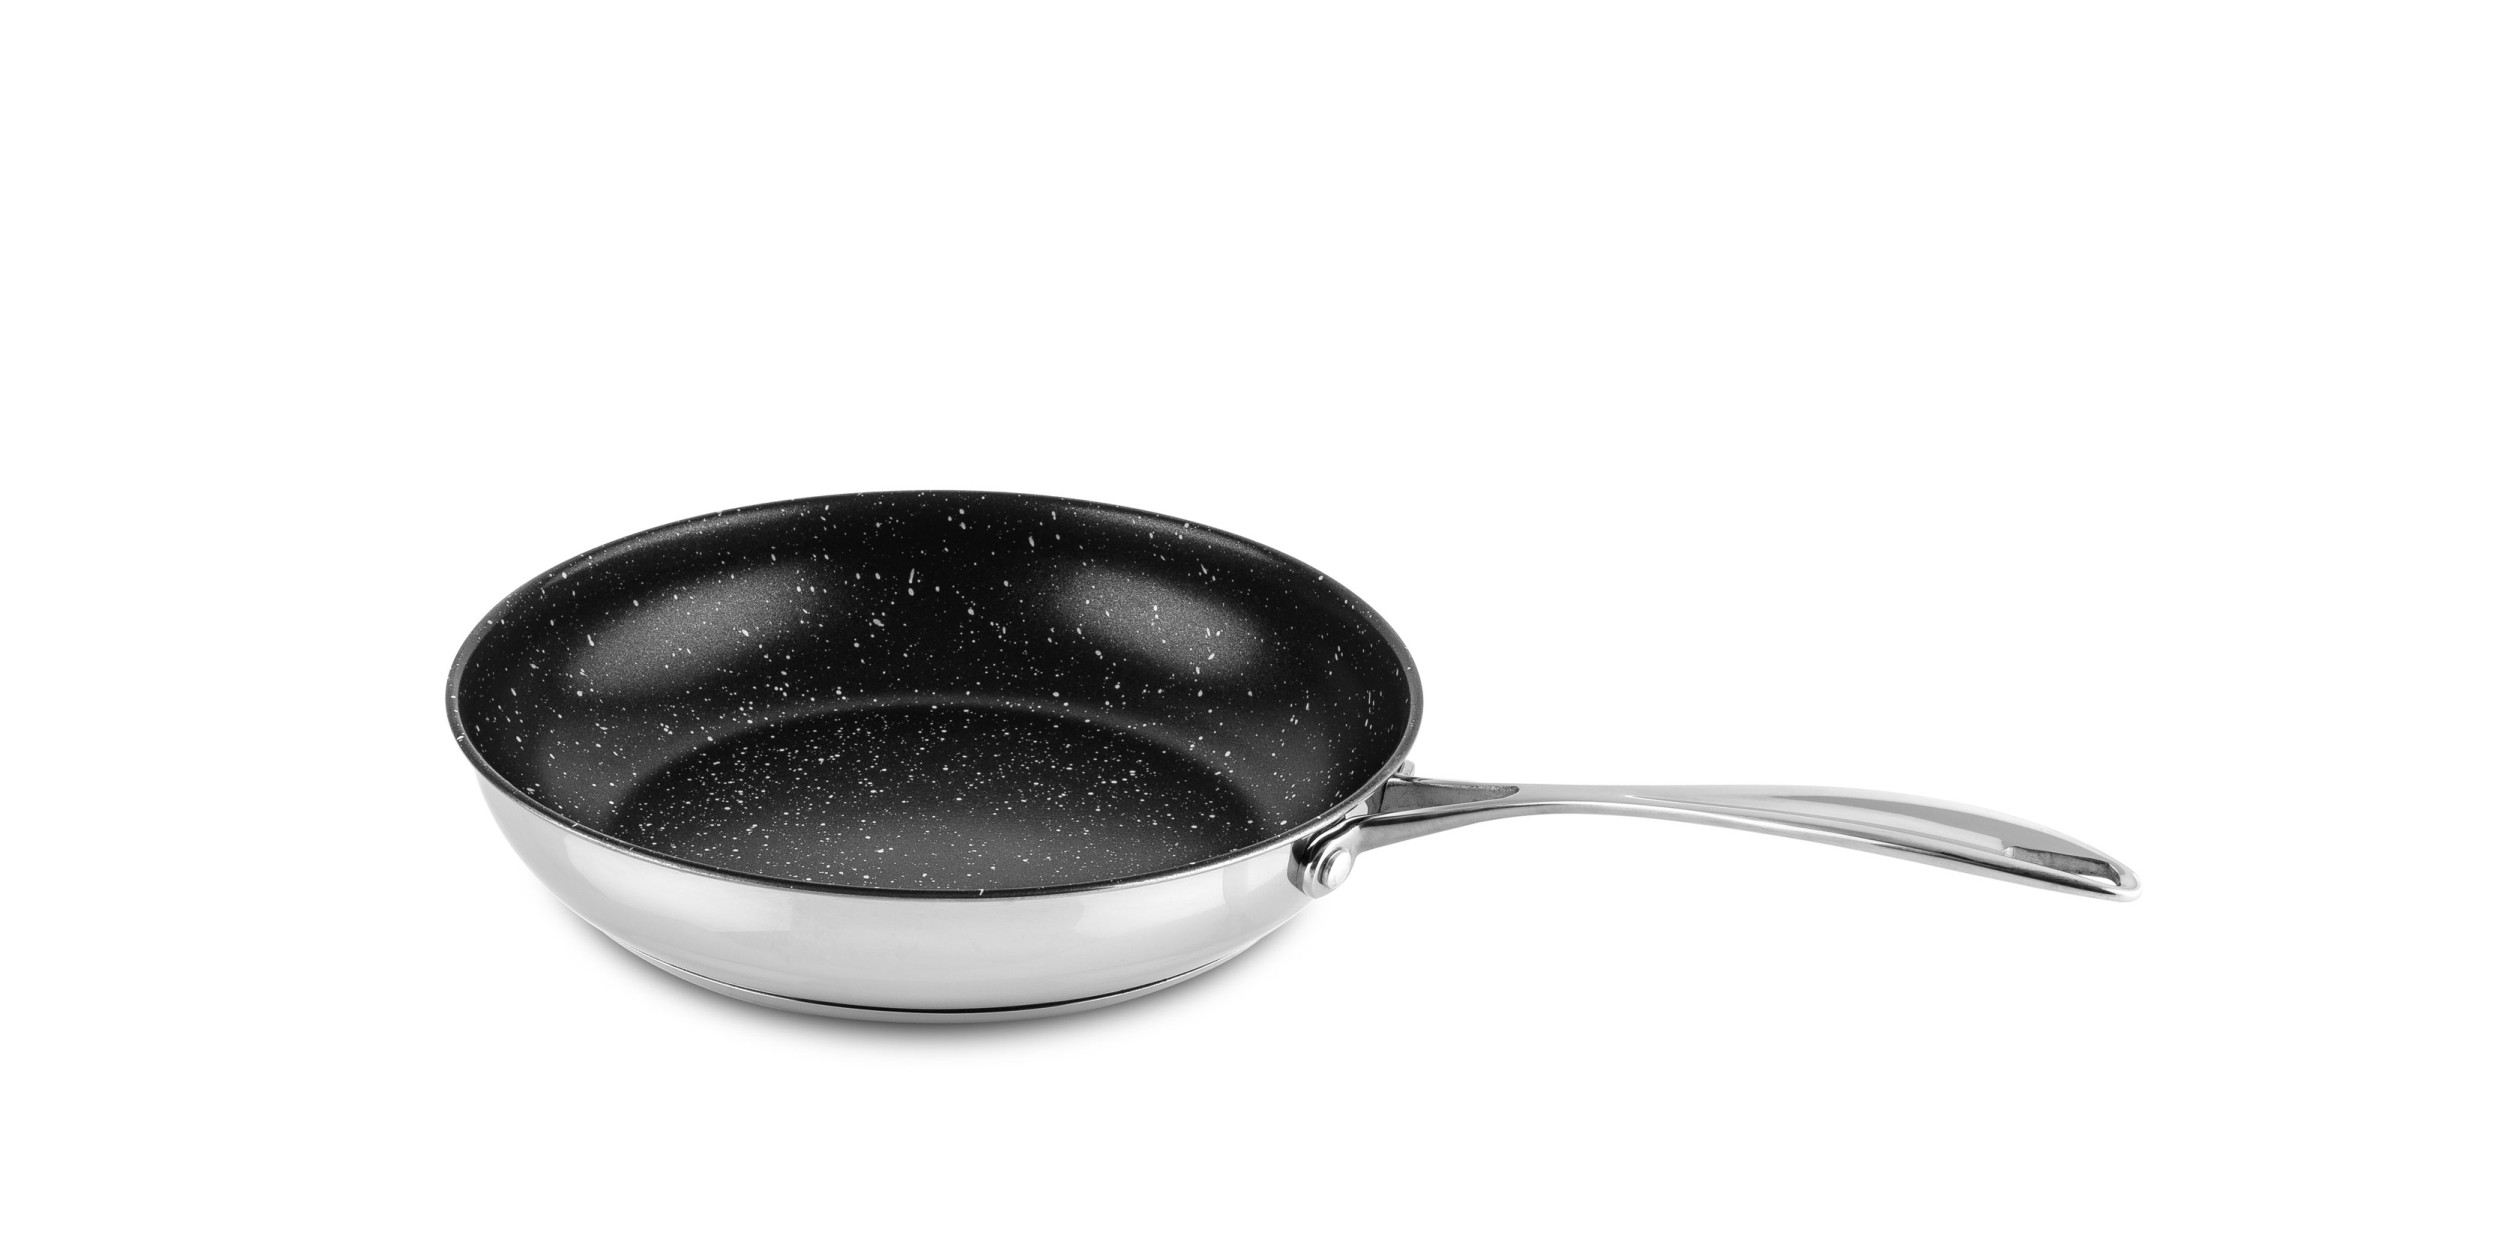 Frying pan 28 cm with non-stick coating Glamour Stone